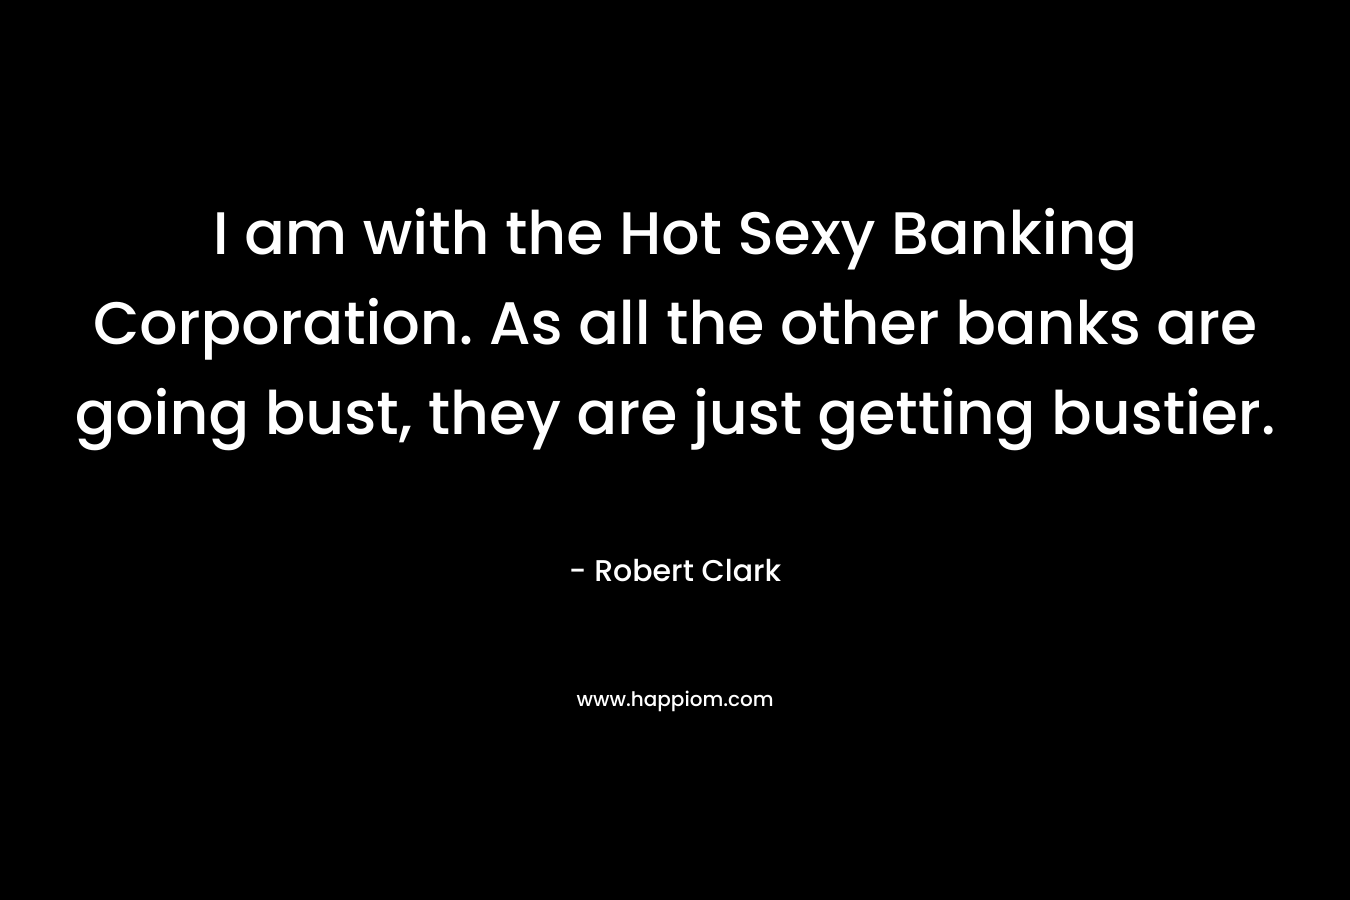 I am with the Hot Sexy Banking Corporation. As all the other banks are going bust, they are just getting bustier. – Robert Clark